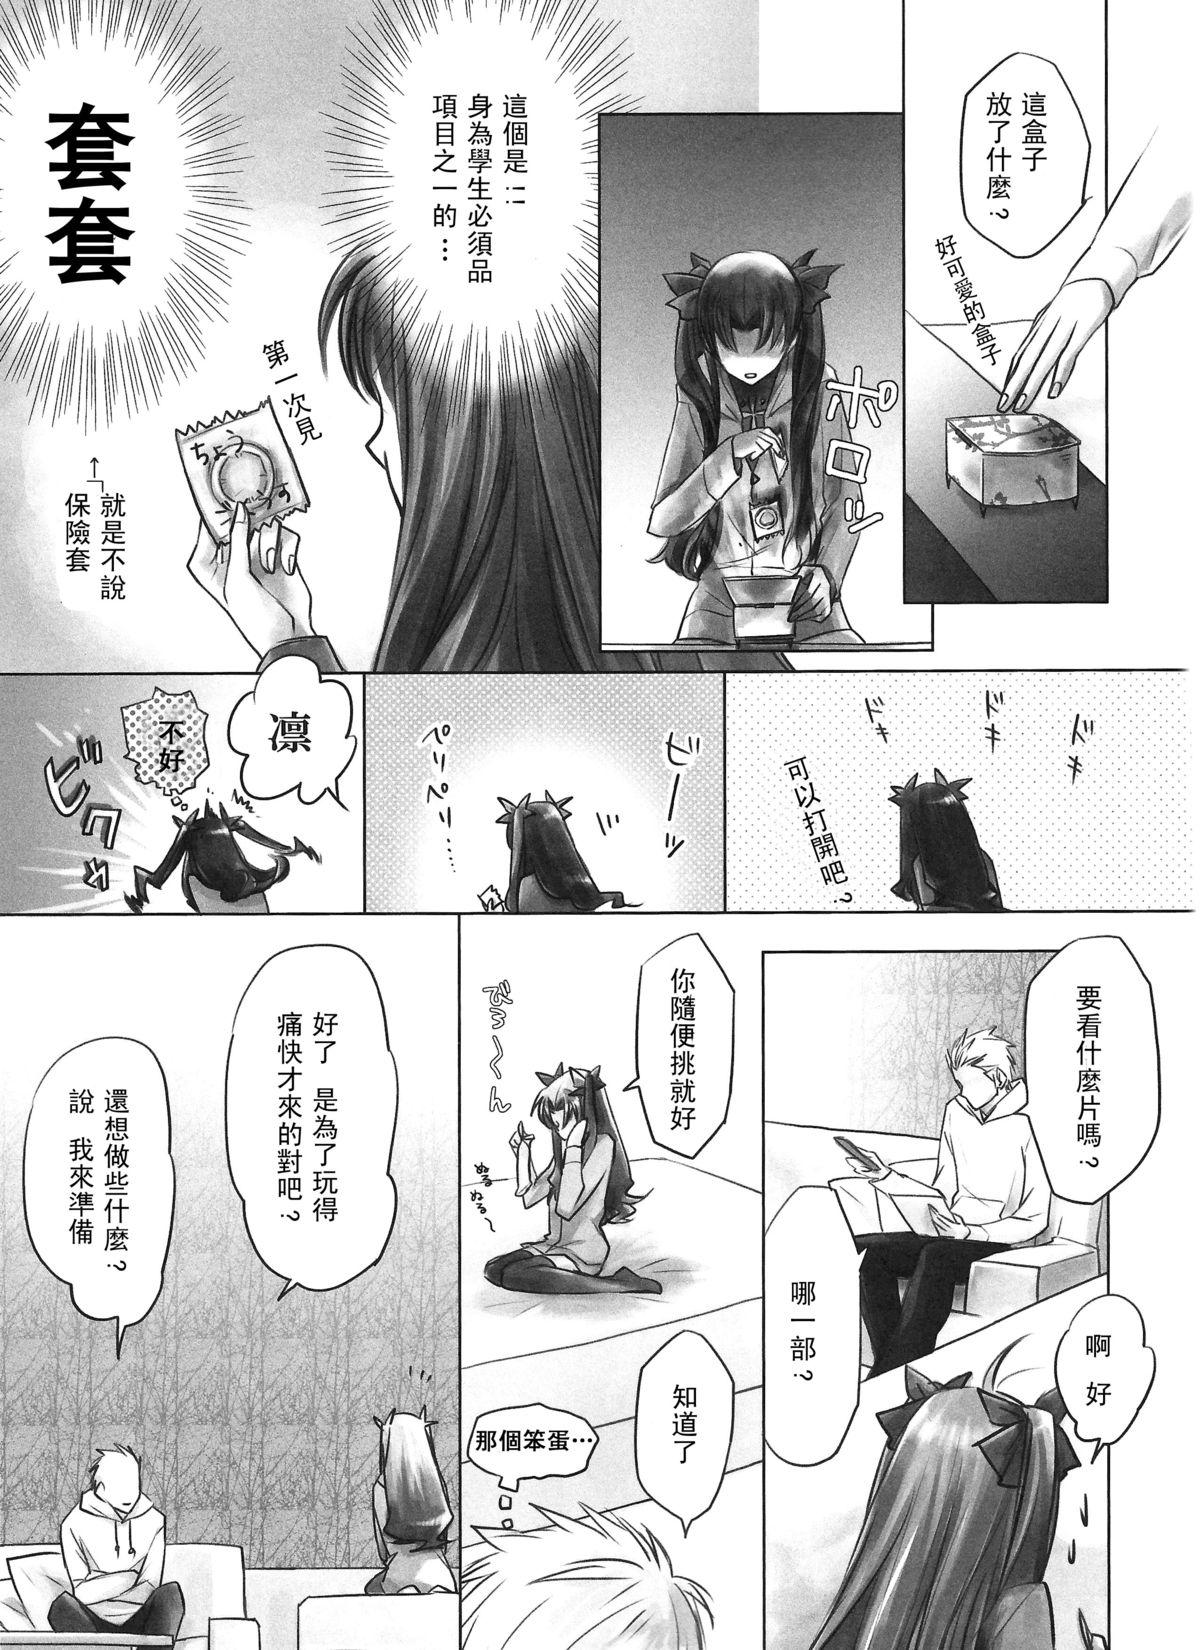 Assgape One/stay night - Fate stay night Reverse - Page 7